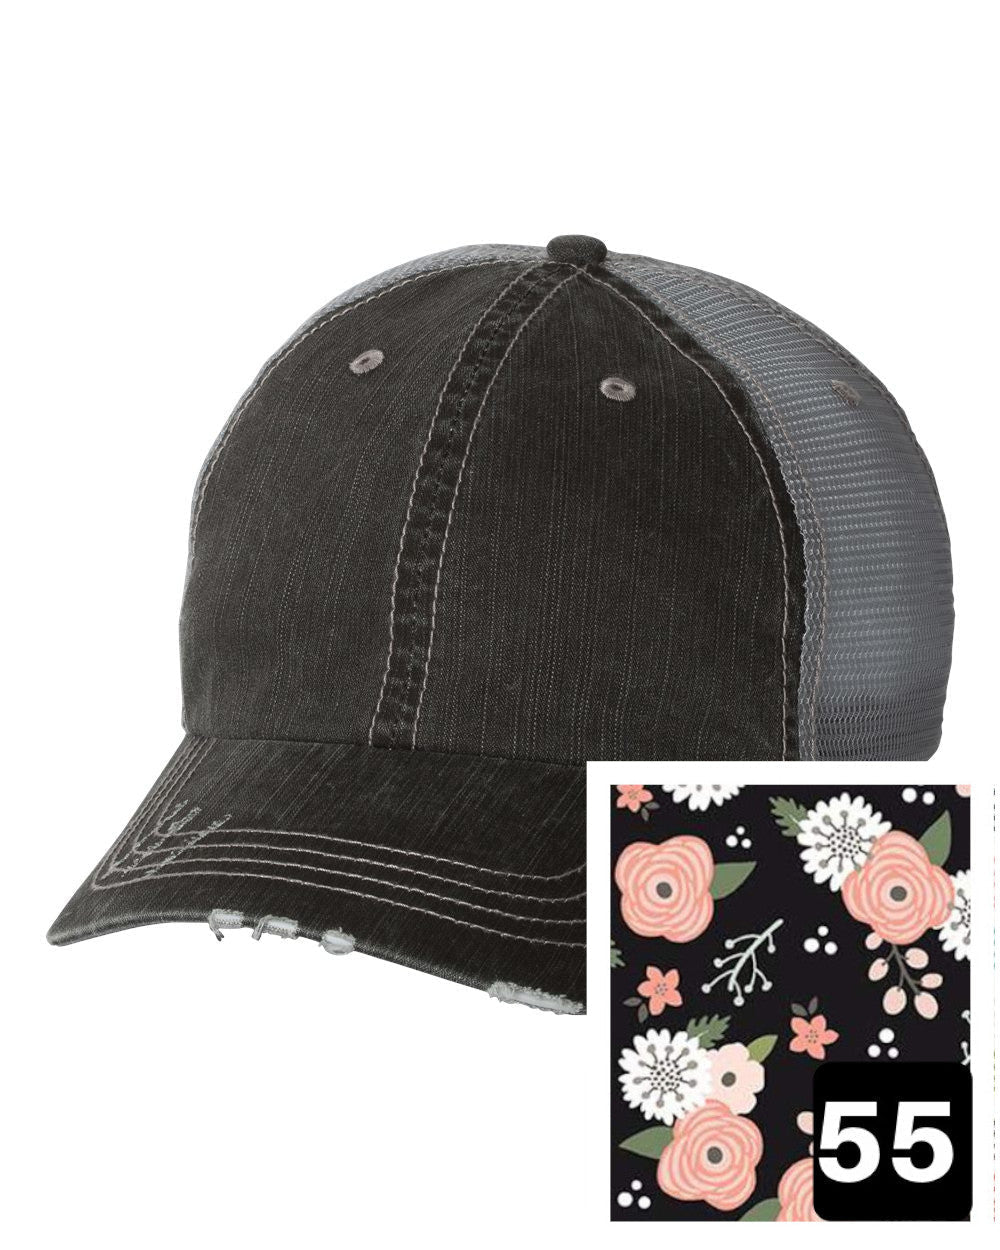 gray distressed trucker hat with petite floral on navy fabric state of Missouri